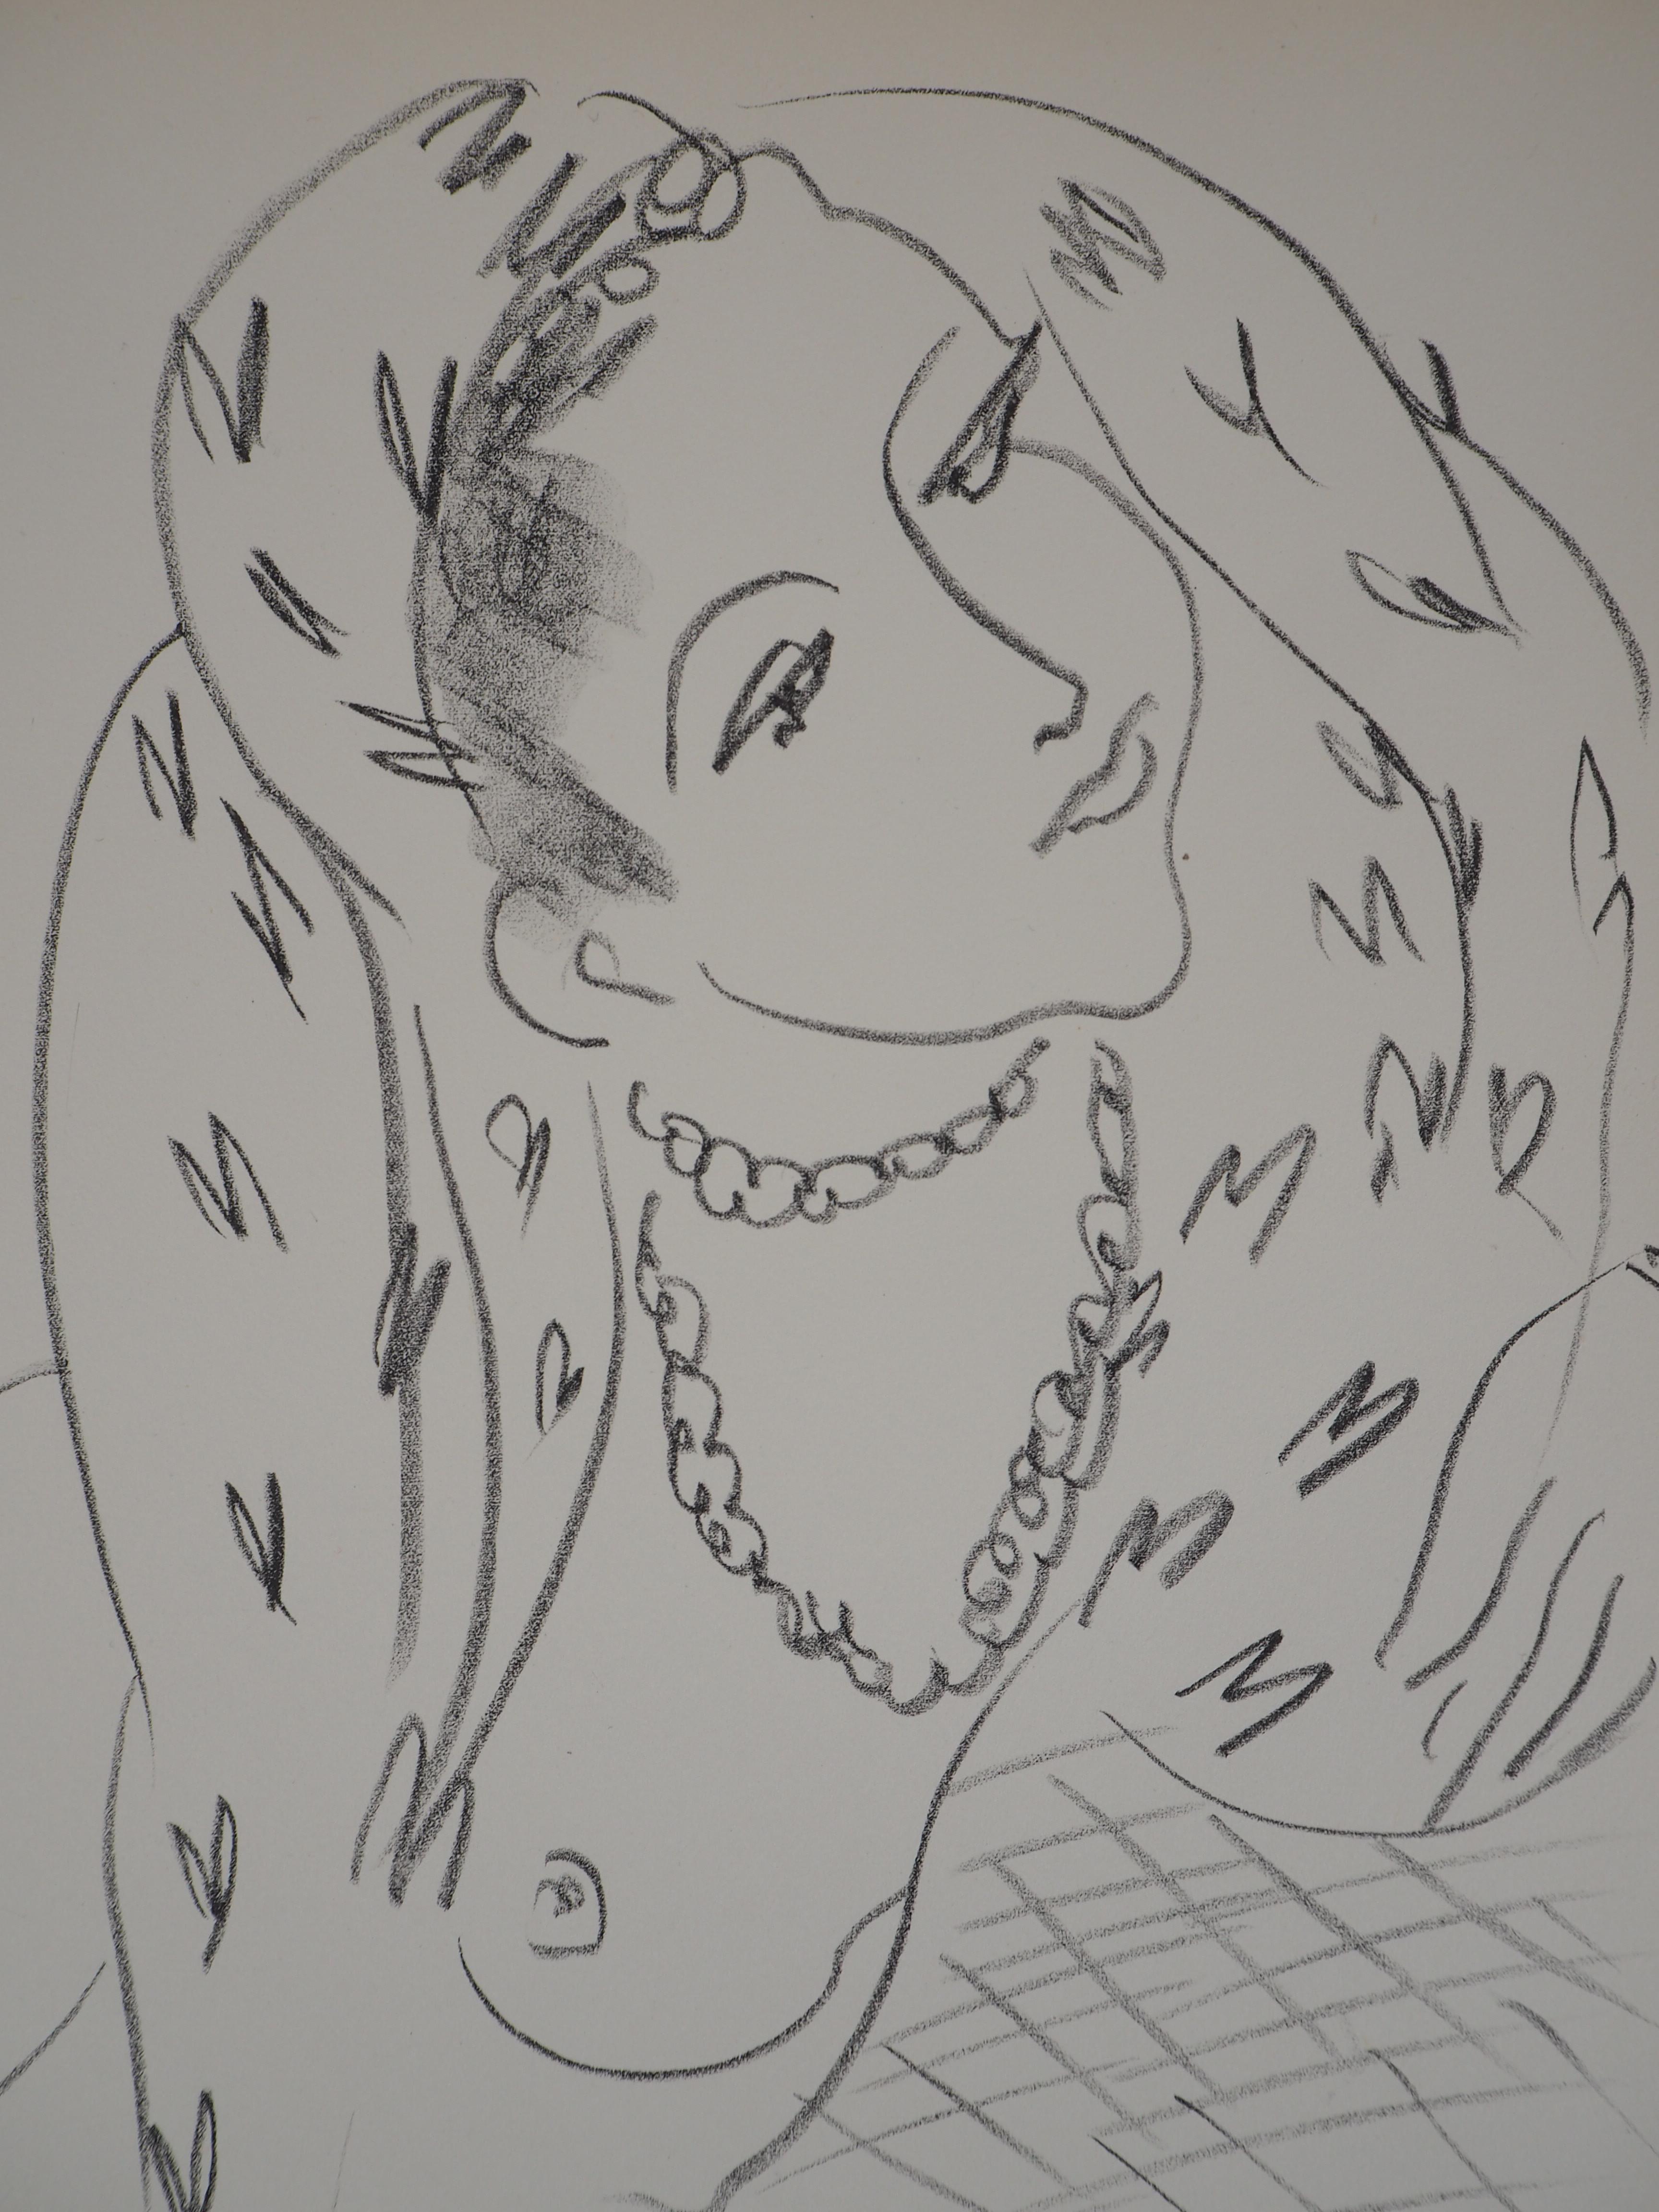 Bohemian Woman : The Fortune Teller - Lithograph, 1943  - Gray Portrait Print by (after) Henri Matisse